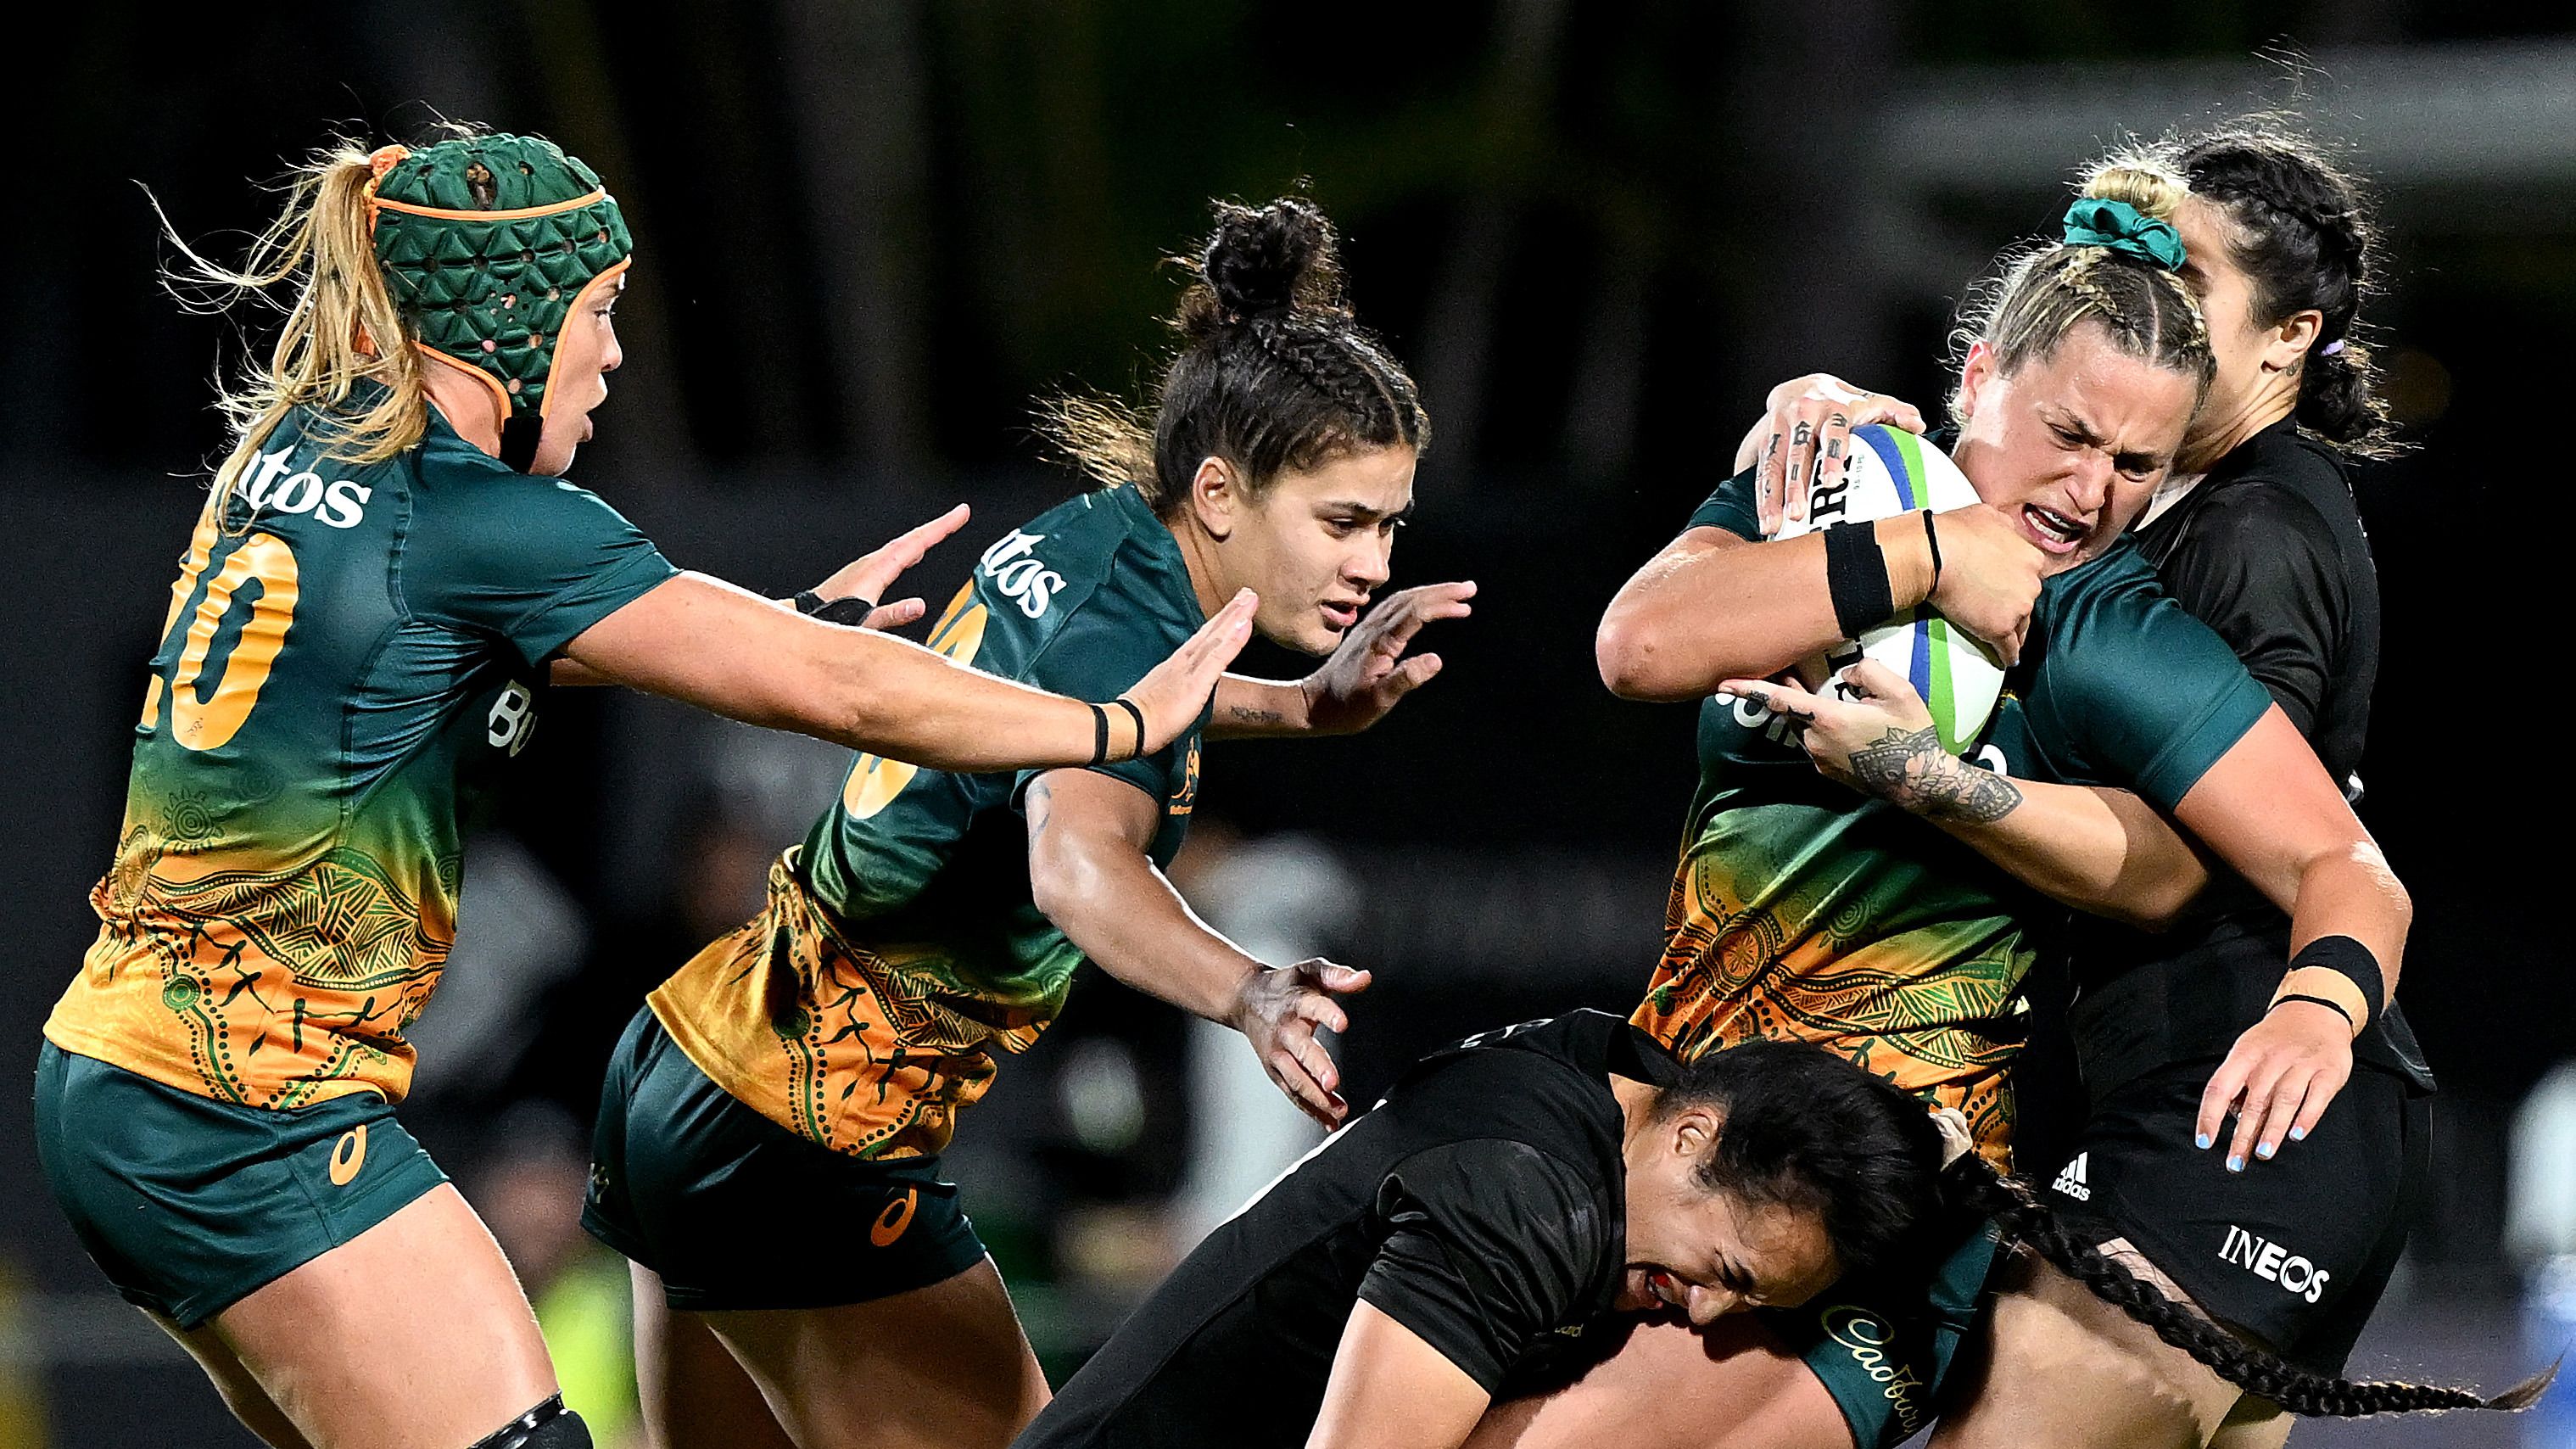 Arabella McKenzie of Australia is tackled during the Pacific Four Series &amp; O&#x27;Reilly Cup match between the Australian Wallaroos and New Zealand Black Ferns.